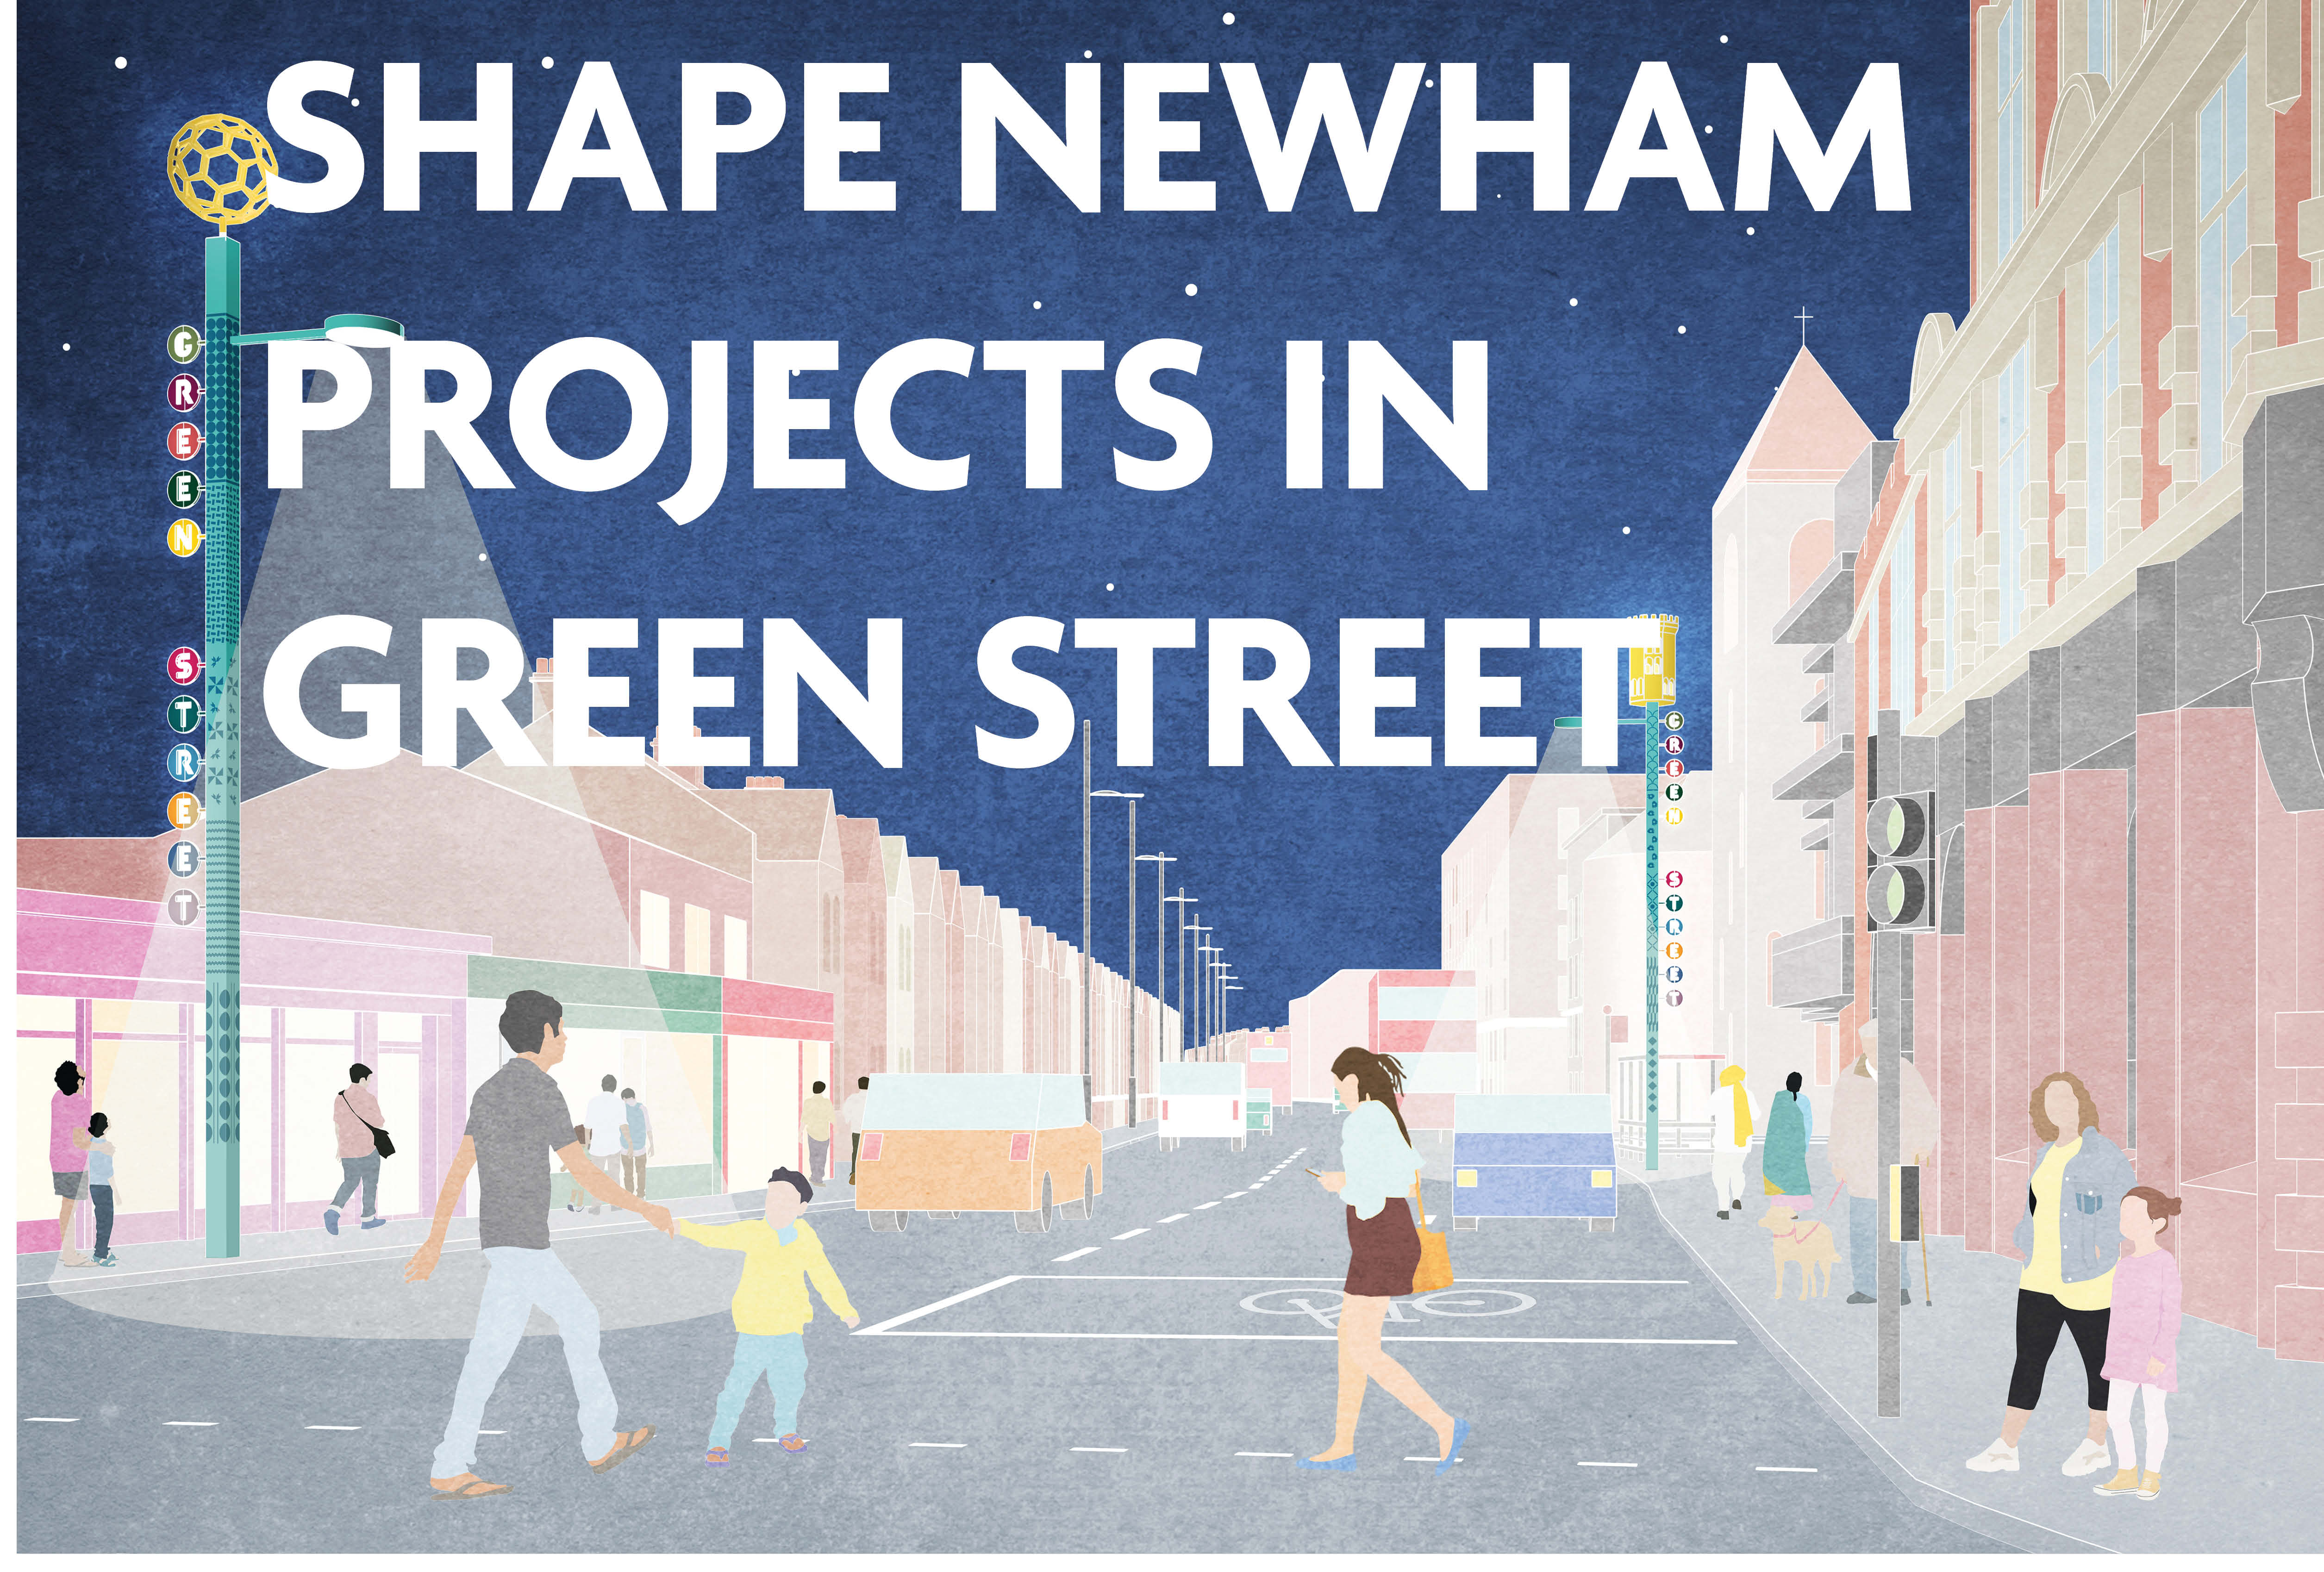 Shape newham projects in Green street